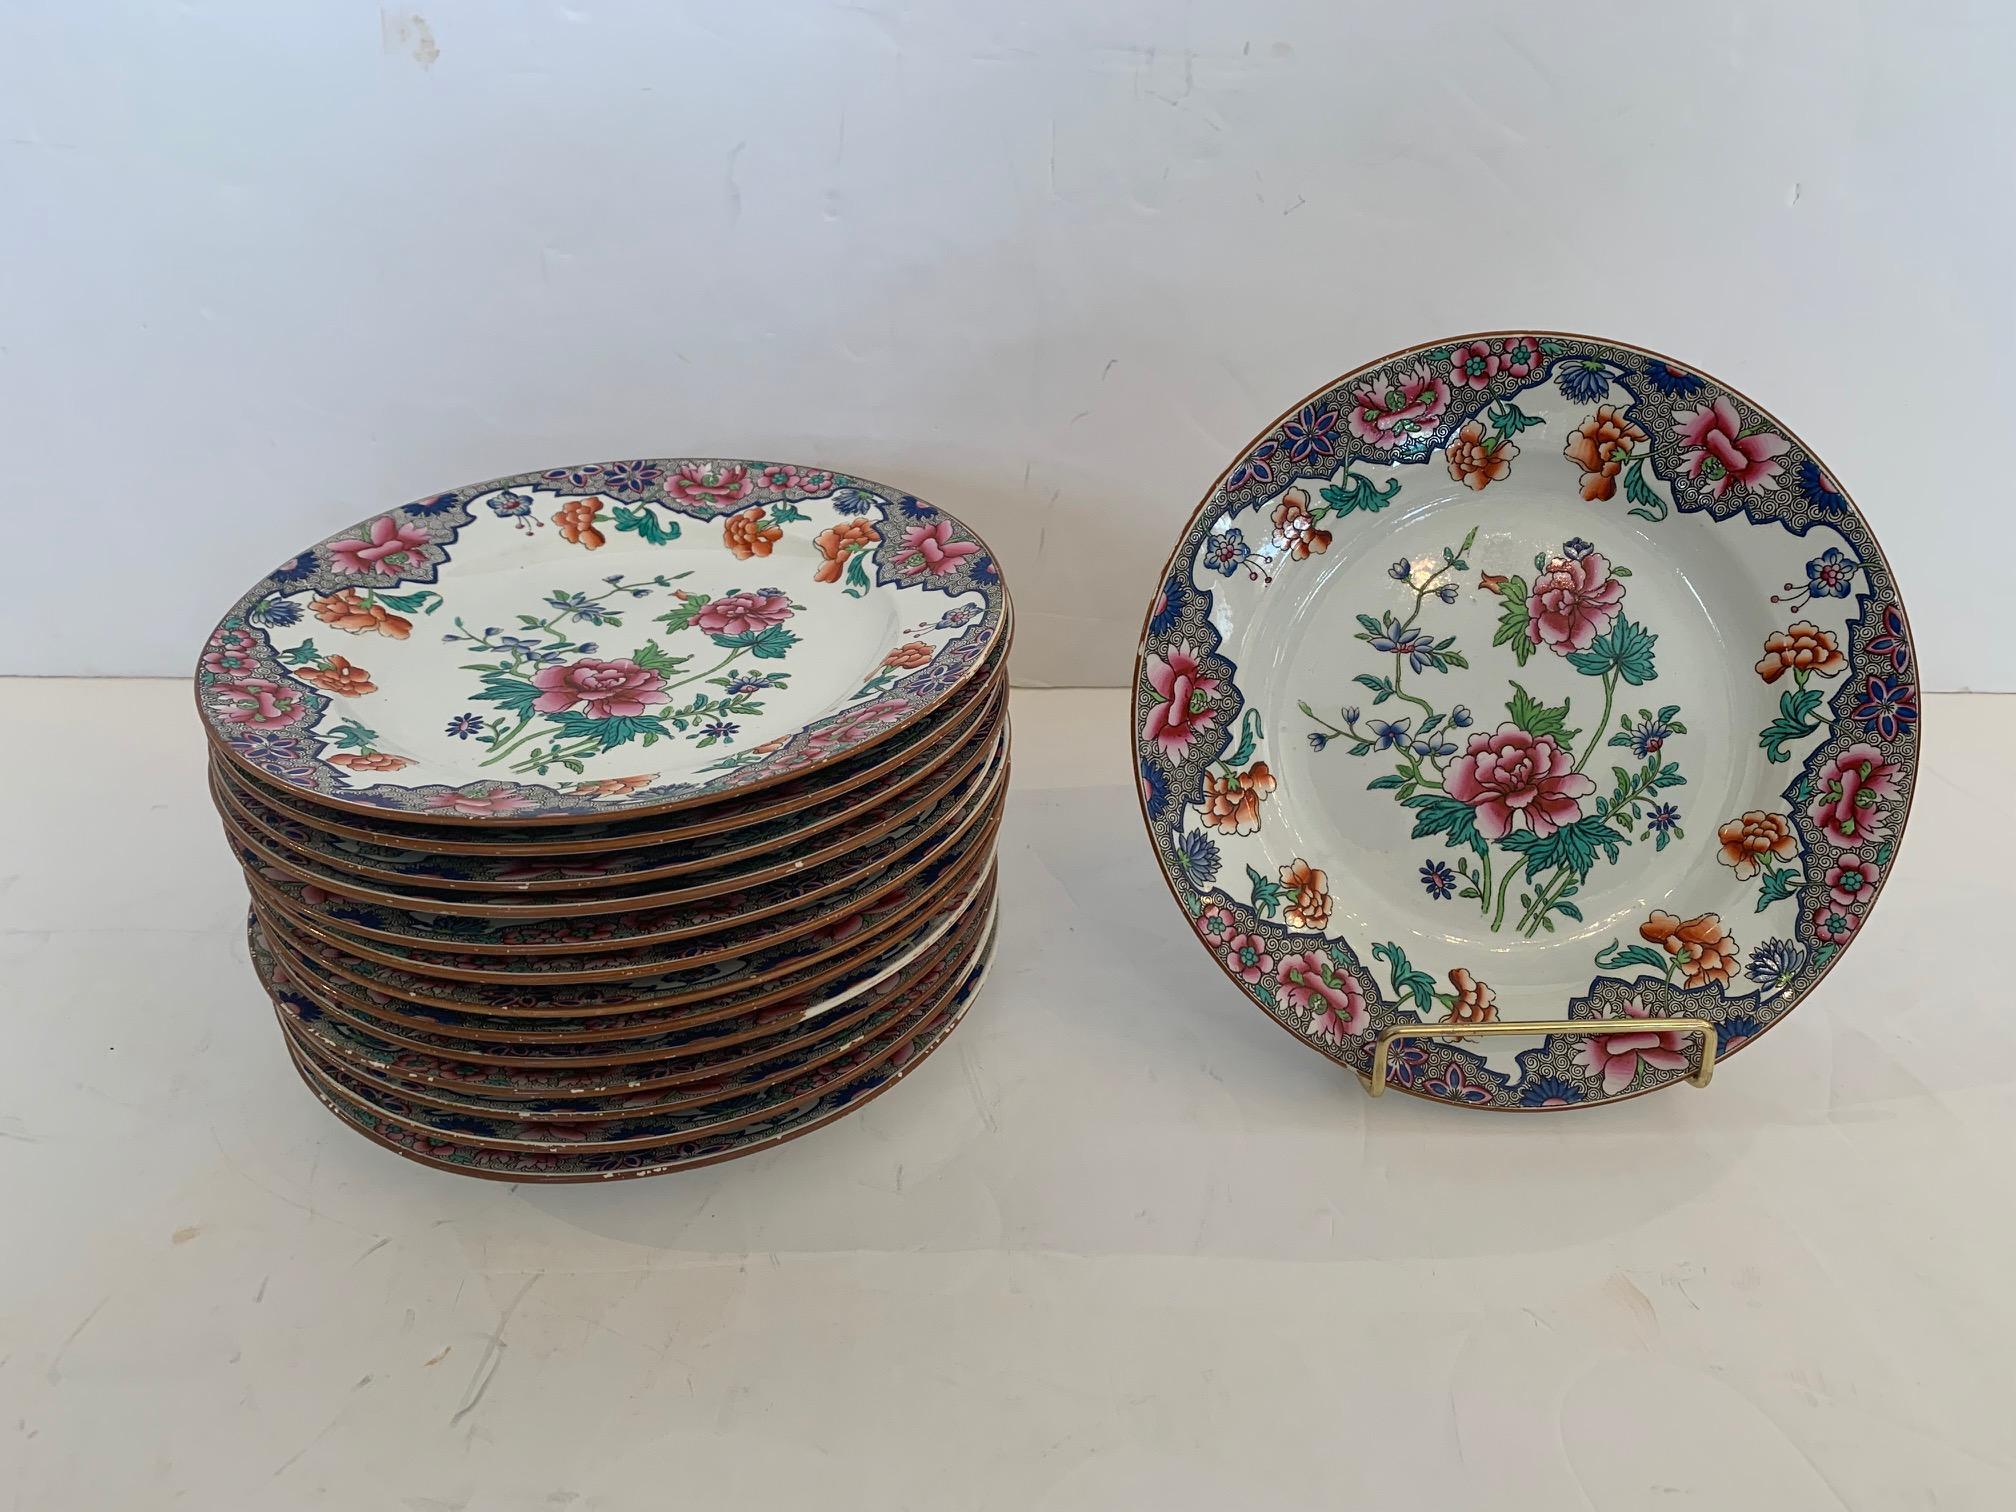 Classic set of Spode dishes/plates having lovely floral pattern. Measure: 8